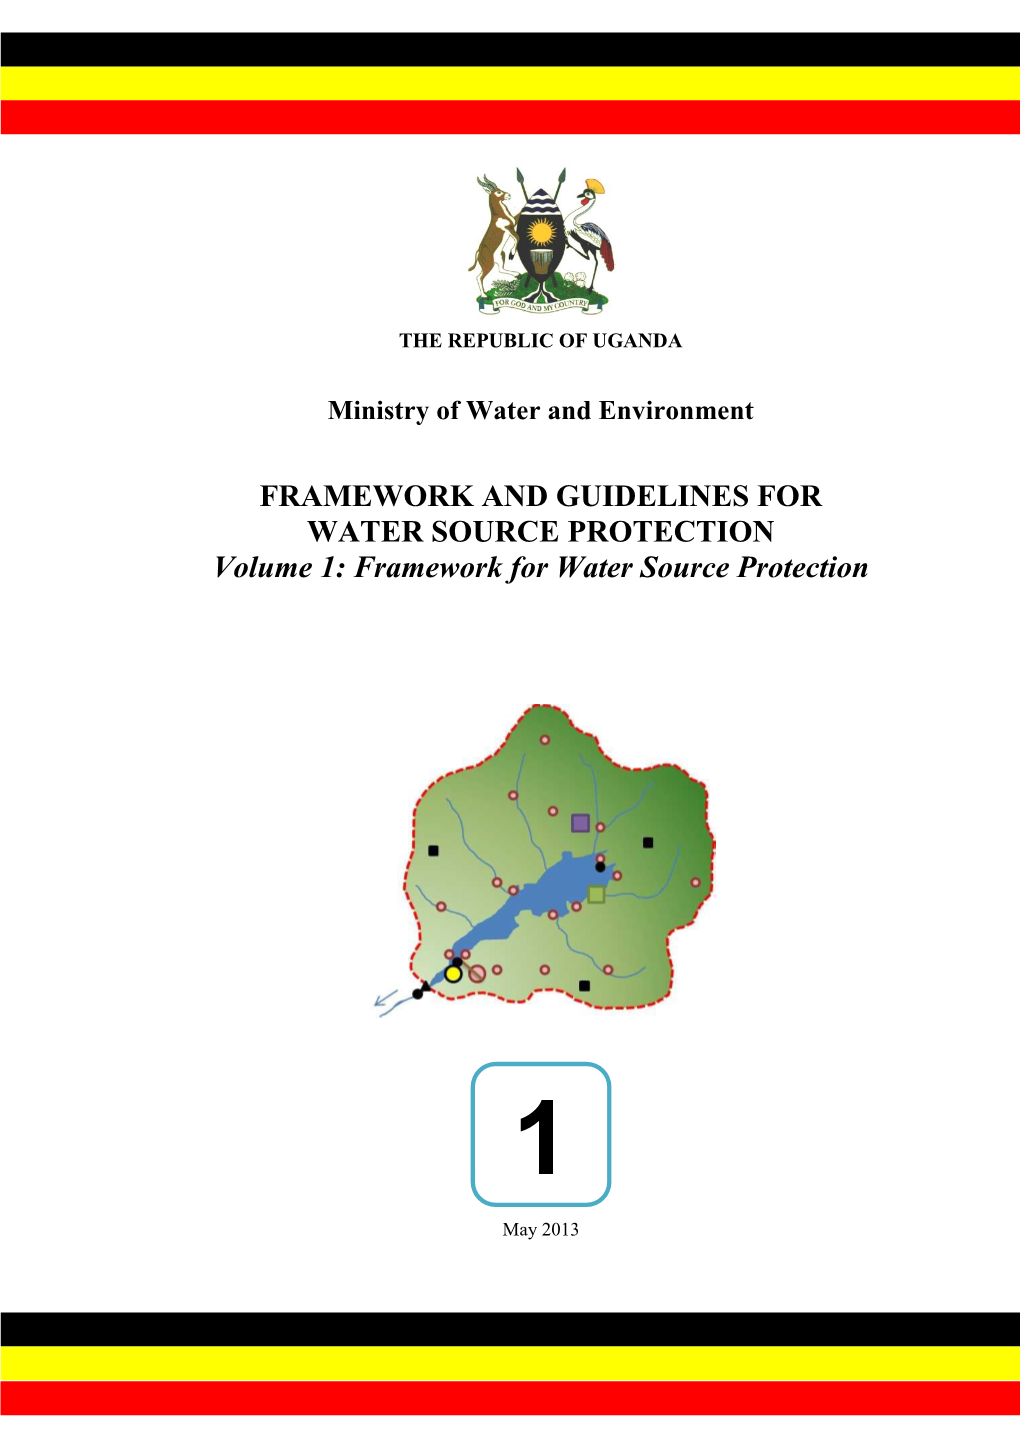 (Volume 1 of Framework and Guidelines for Water Source